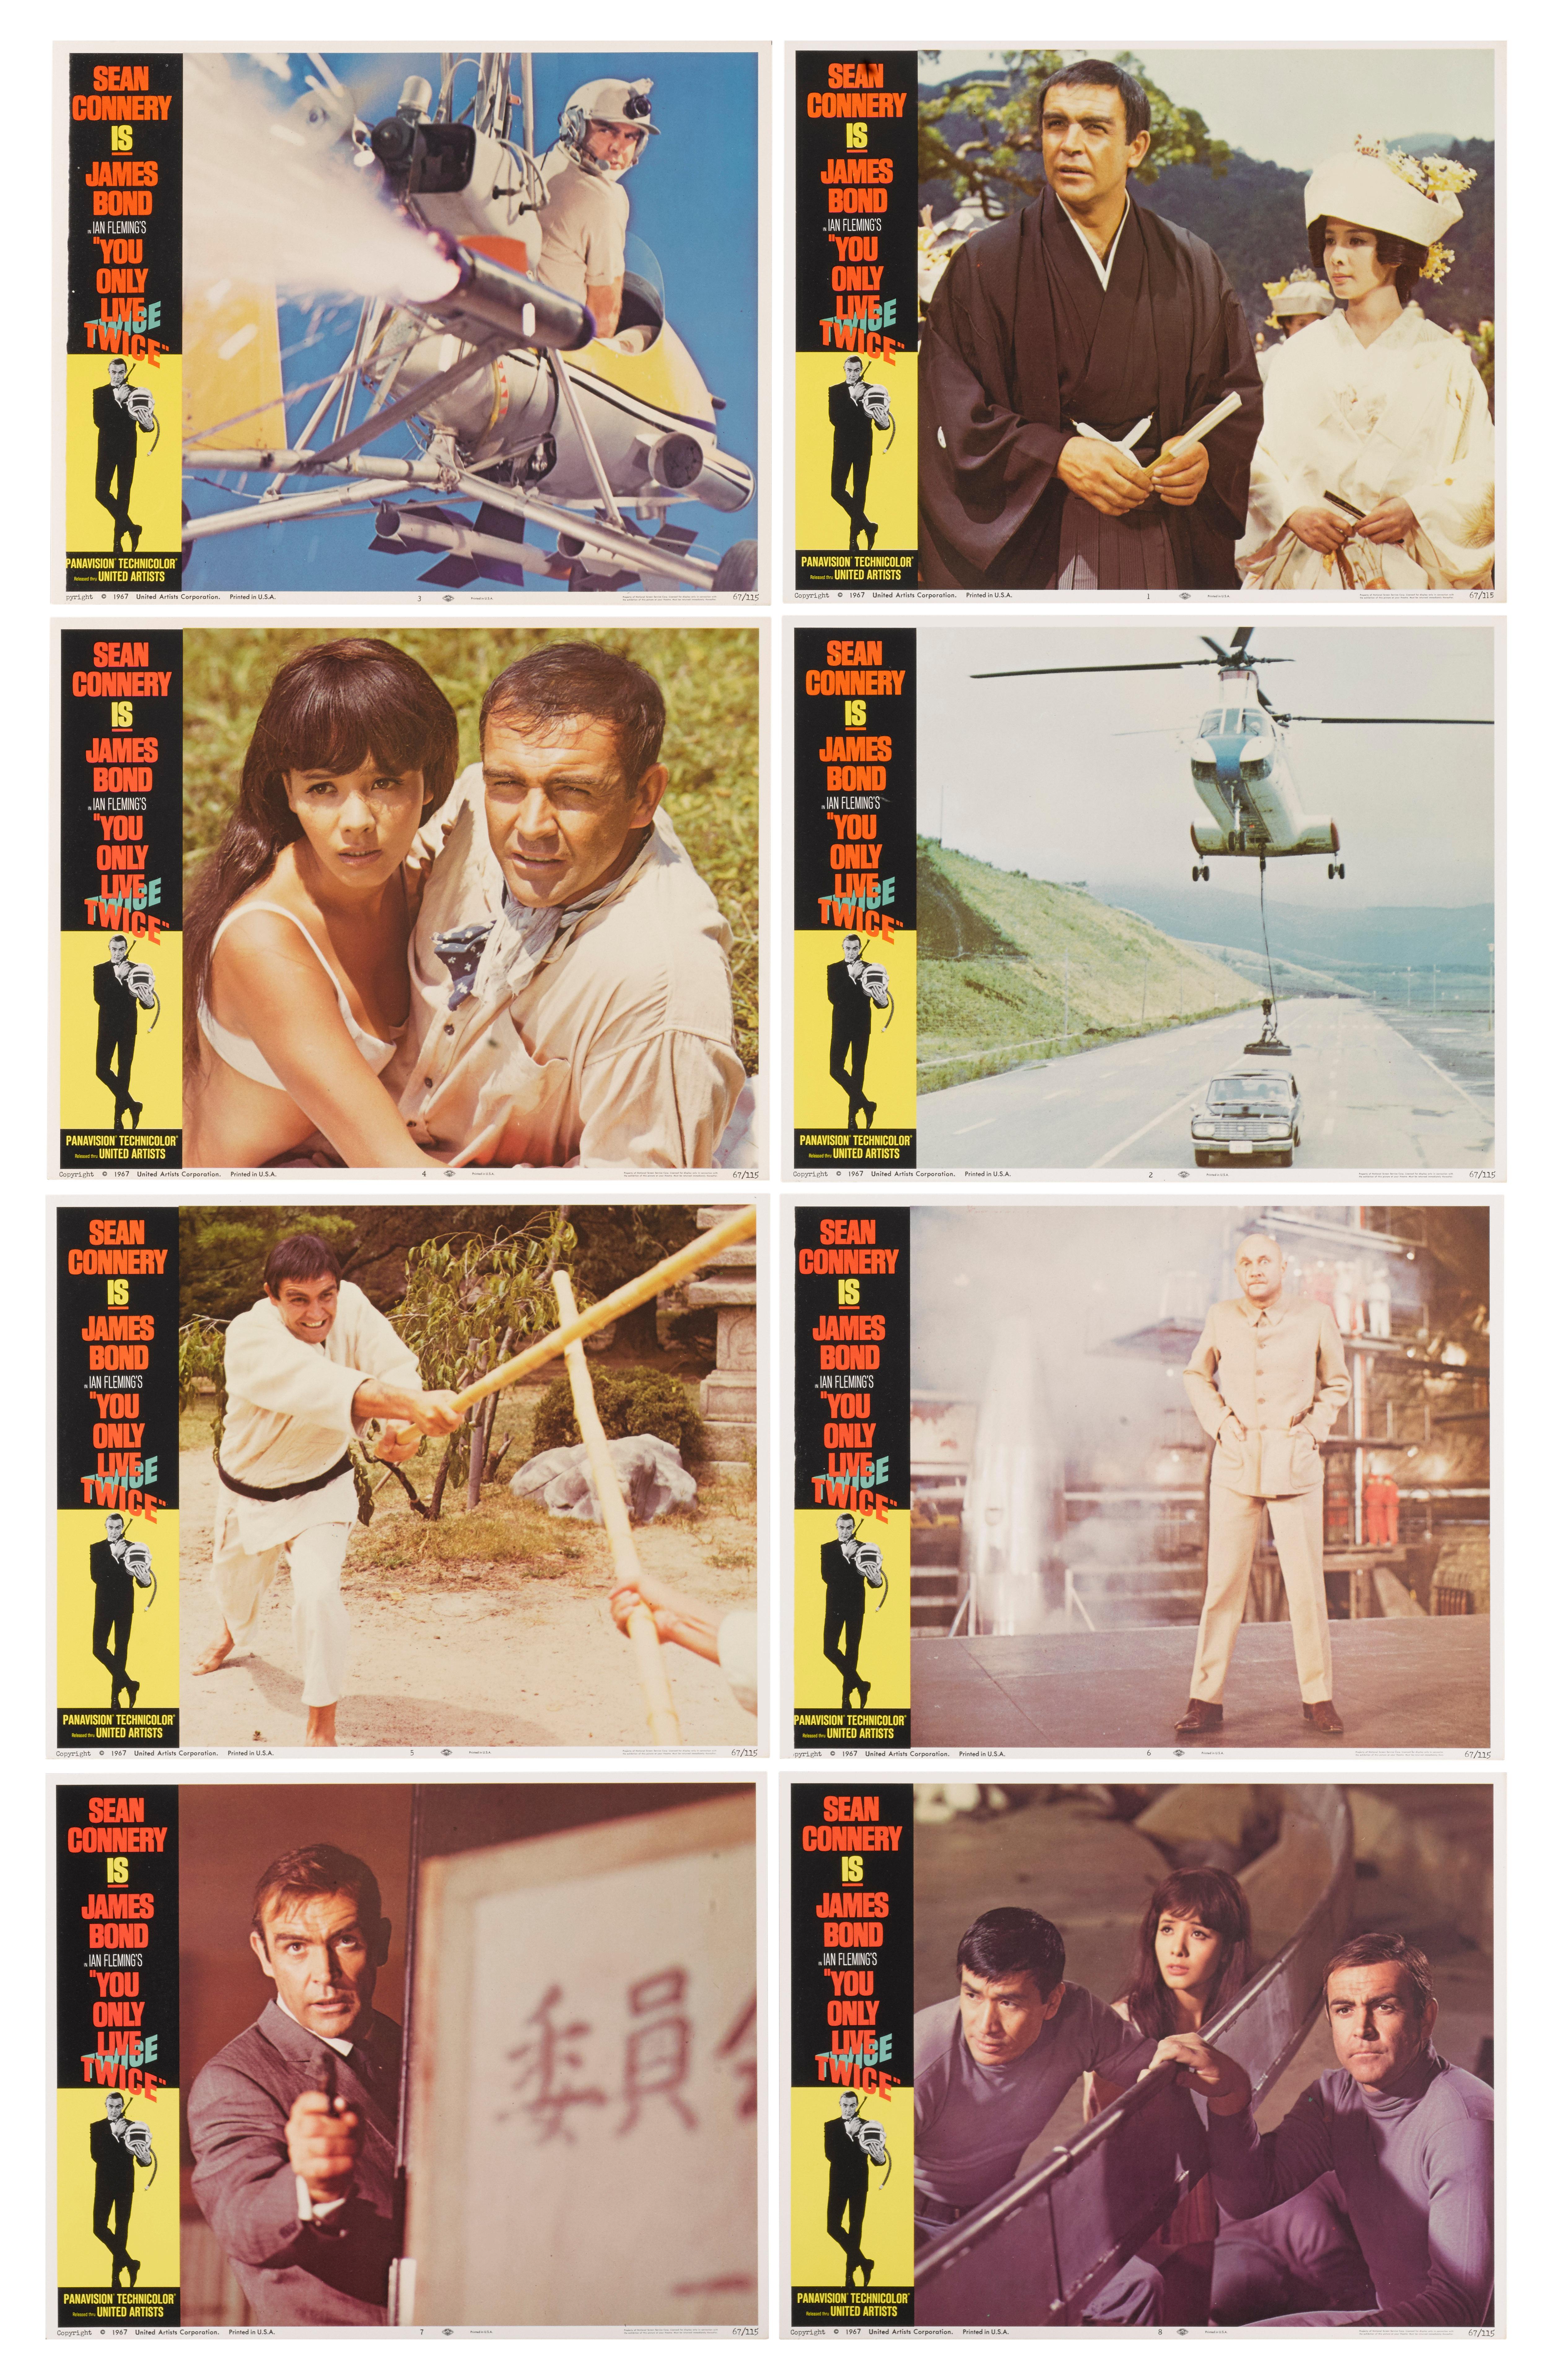 Original US set of 8 Lobby cards for the fifth James Bond film.
This set of lobby cards would be sent out flat packed in strong card and shipped by Federal Express.